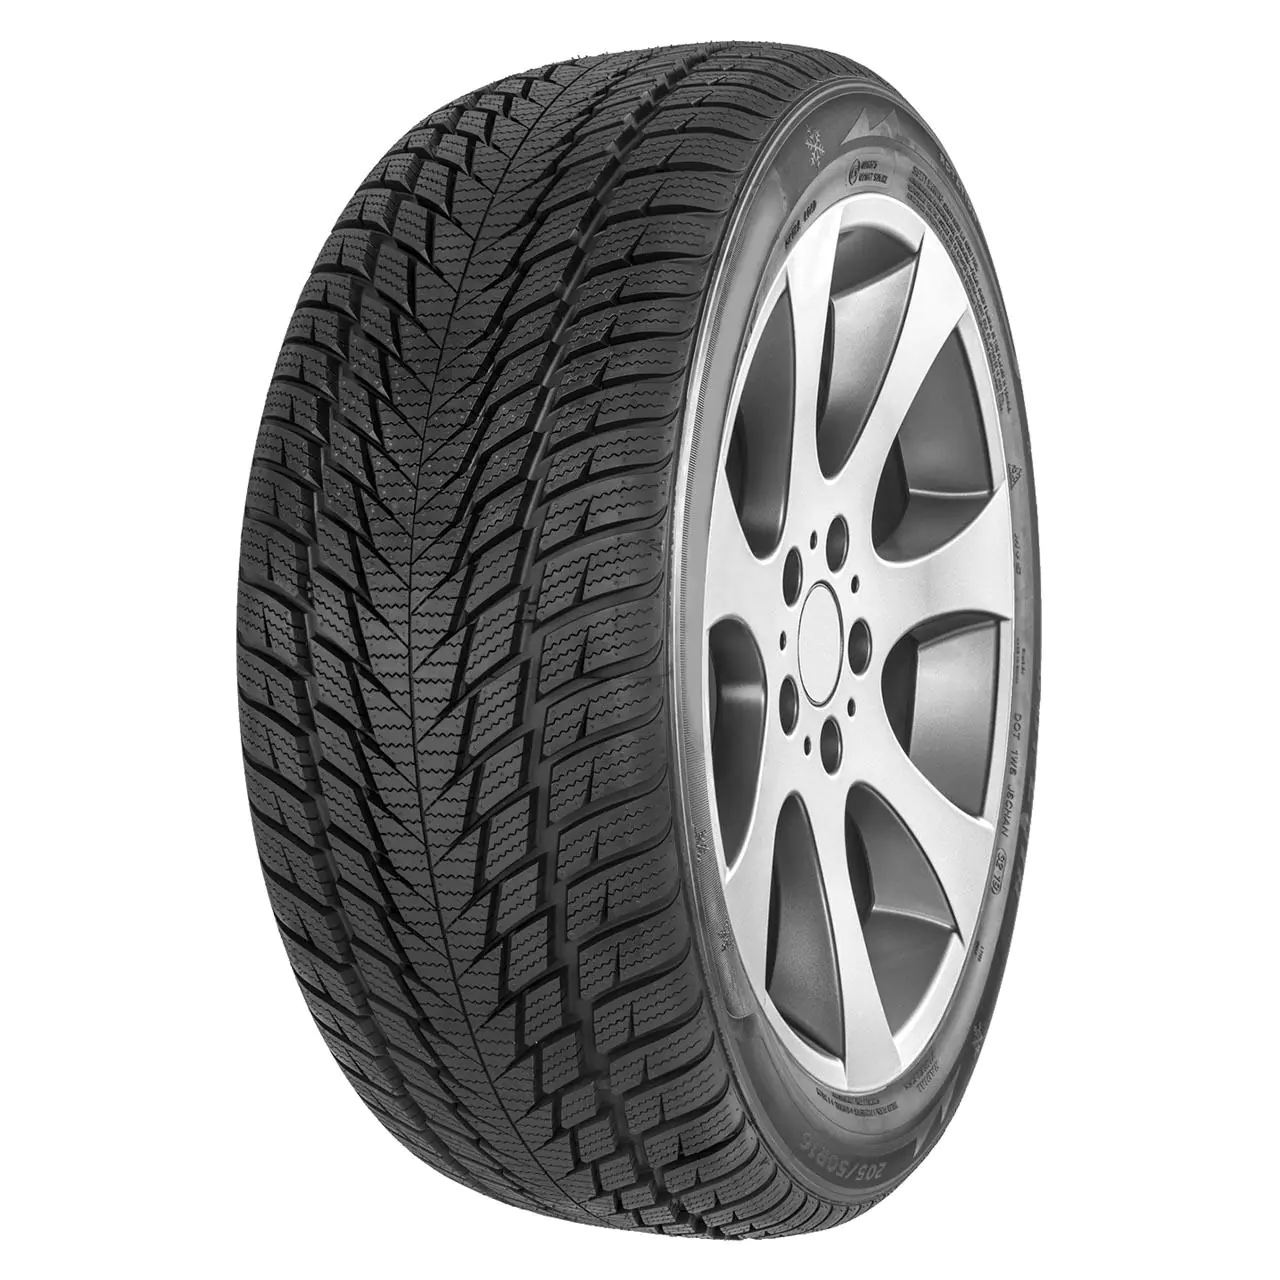 Gomme Autovettura Fortuna 235/35 R20 92V GOWIN UHP3 XL M+S Invernale